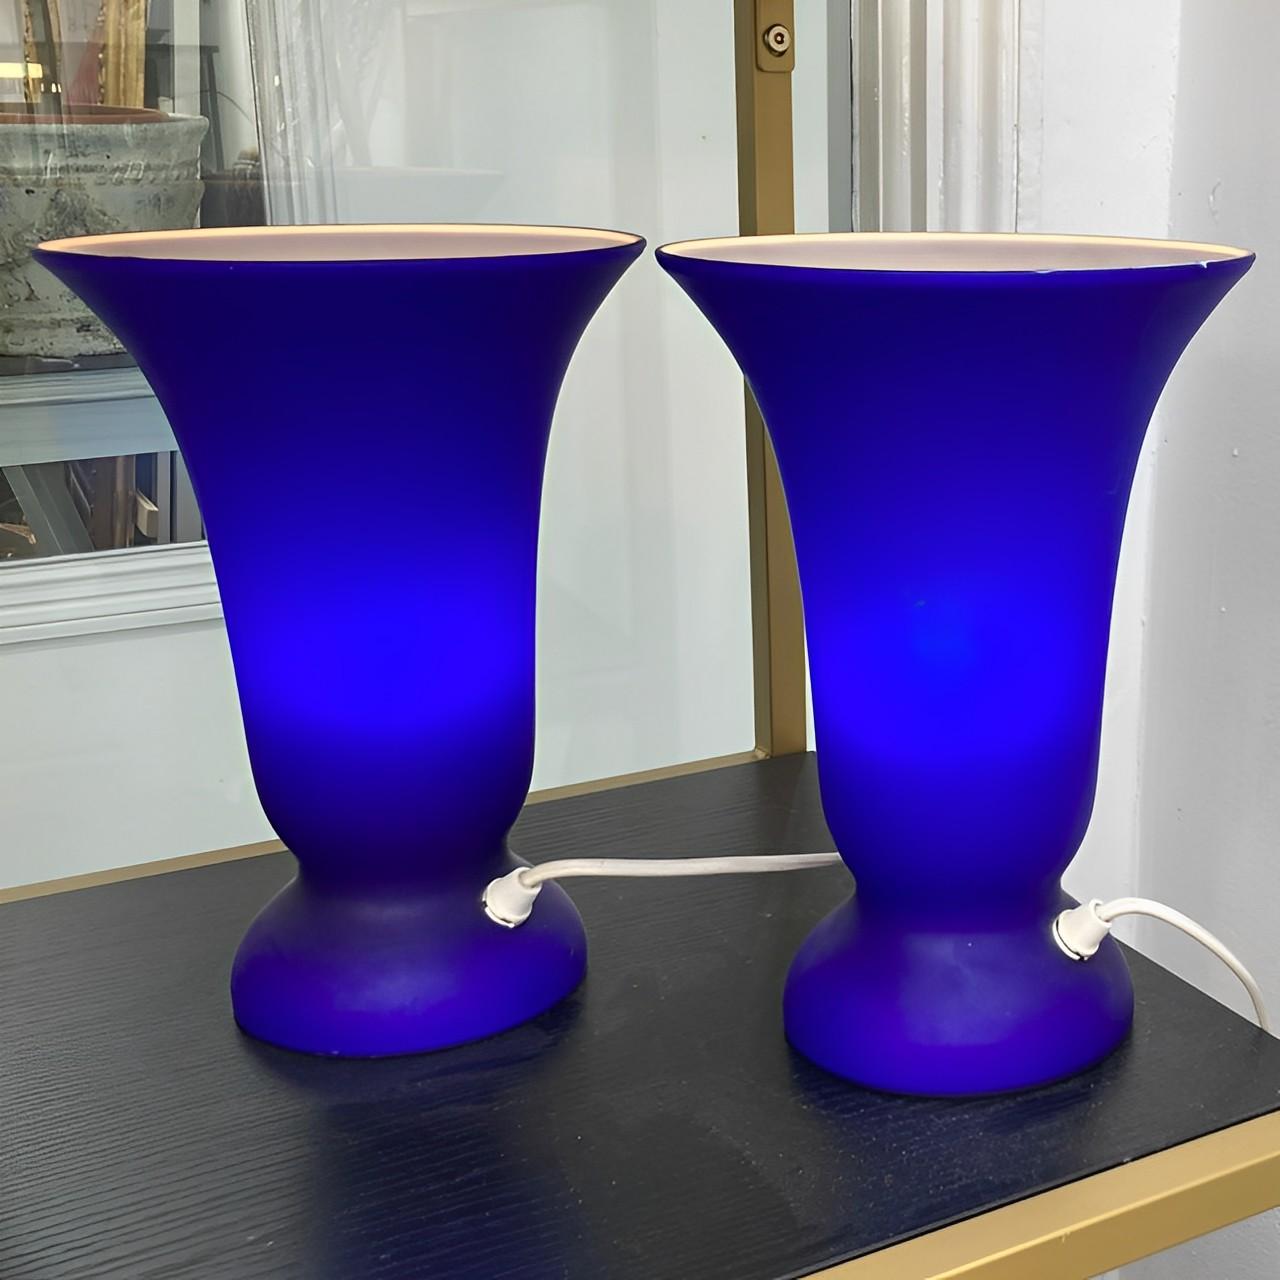 Pair of Cobalt Blue Glass Table Lamps with White Interior, circa 1970s For Sale 2